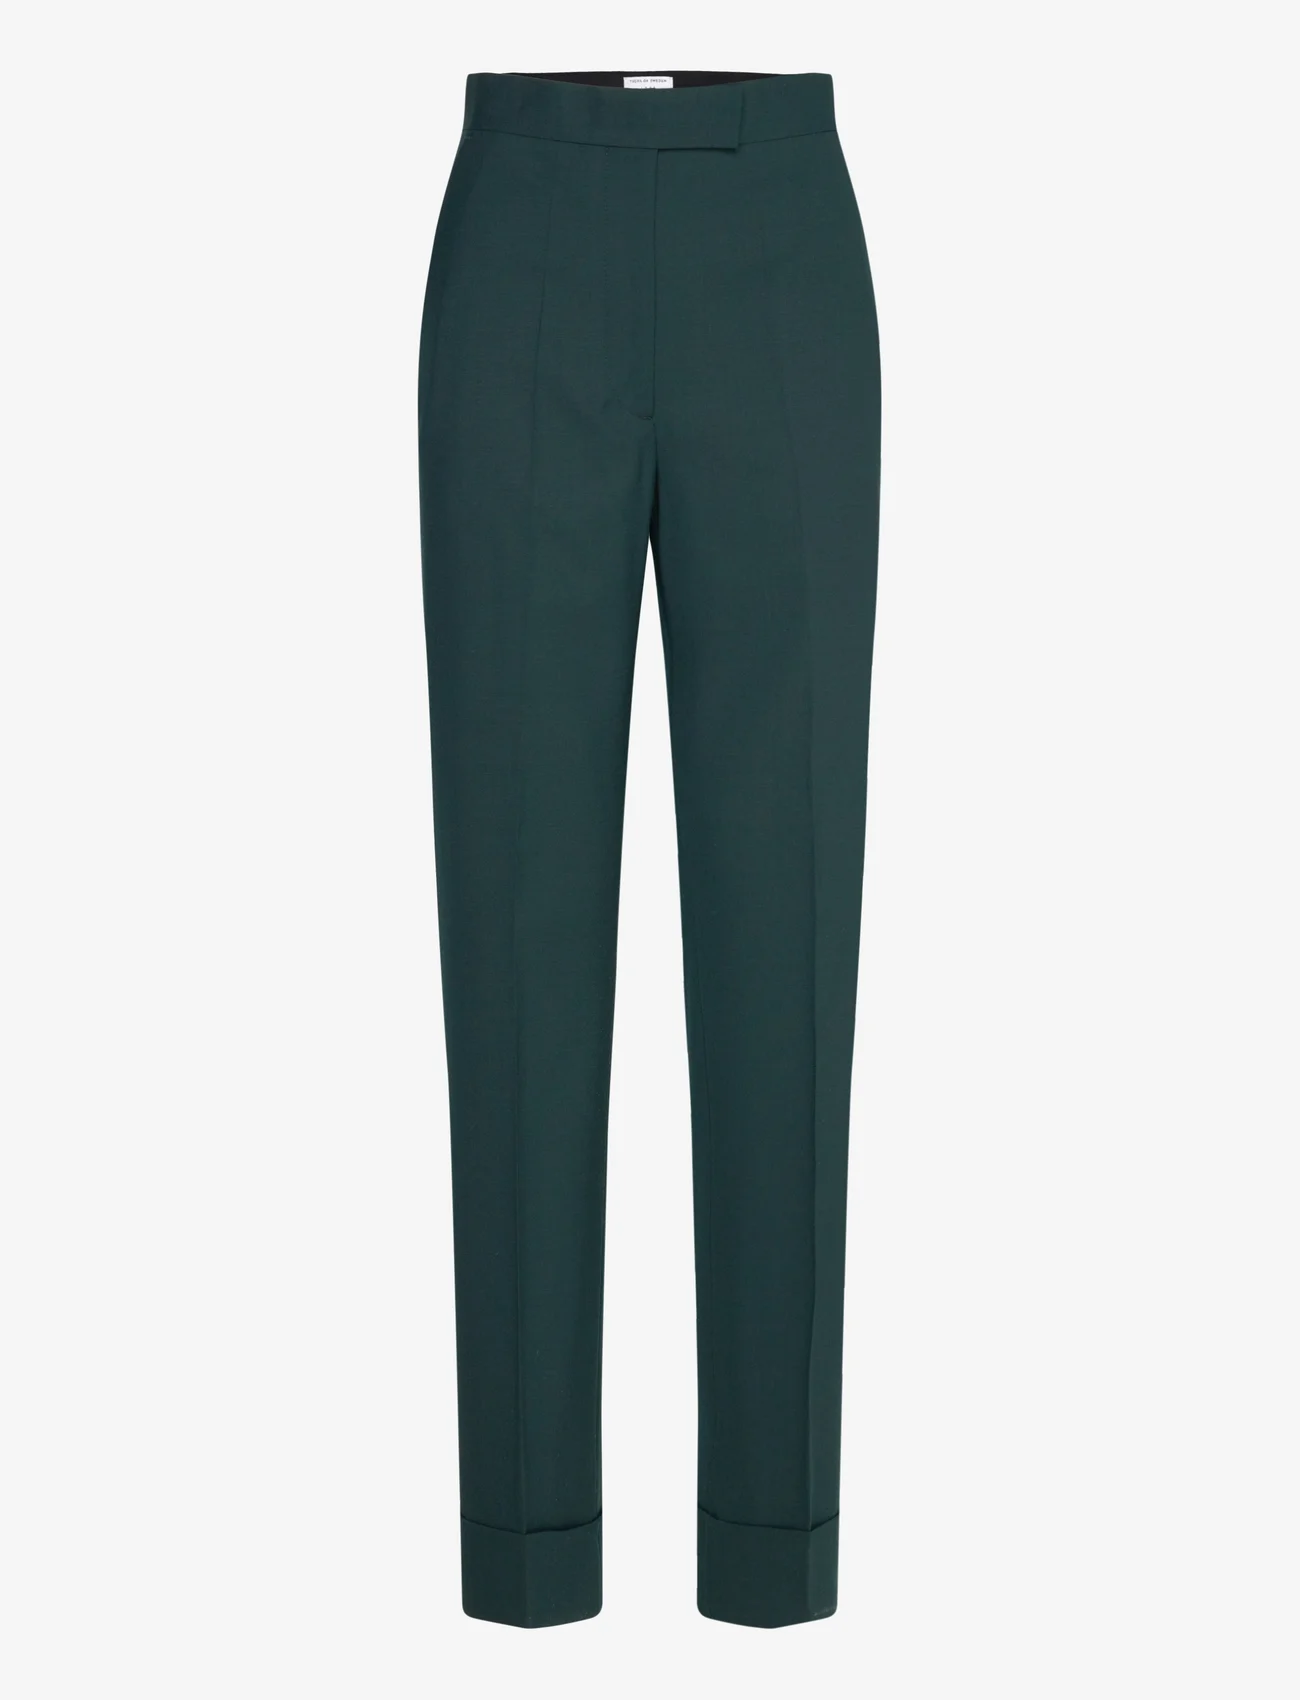 Tiger of Sweden - FRAGRIA F - tailored trousers - black green - 0